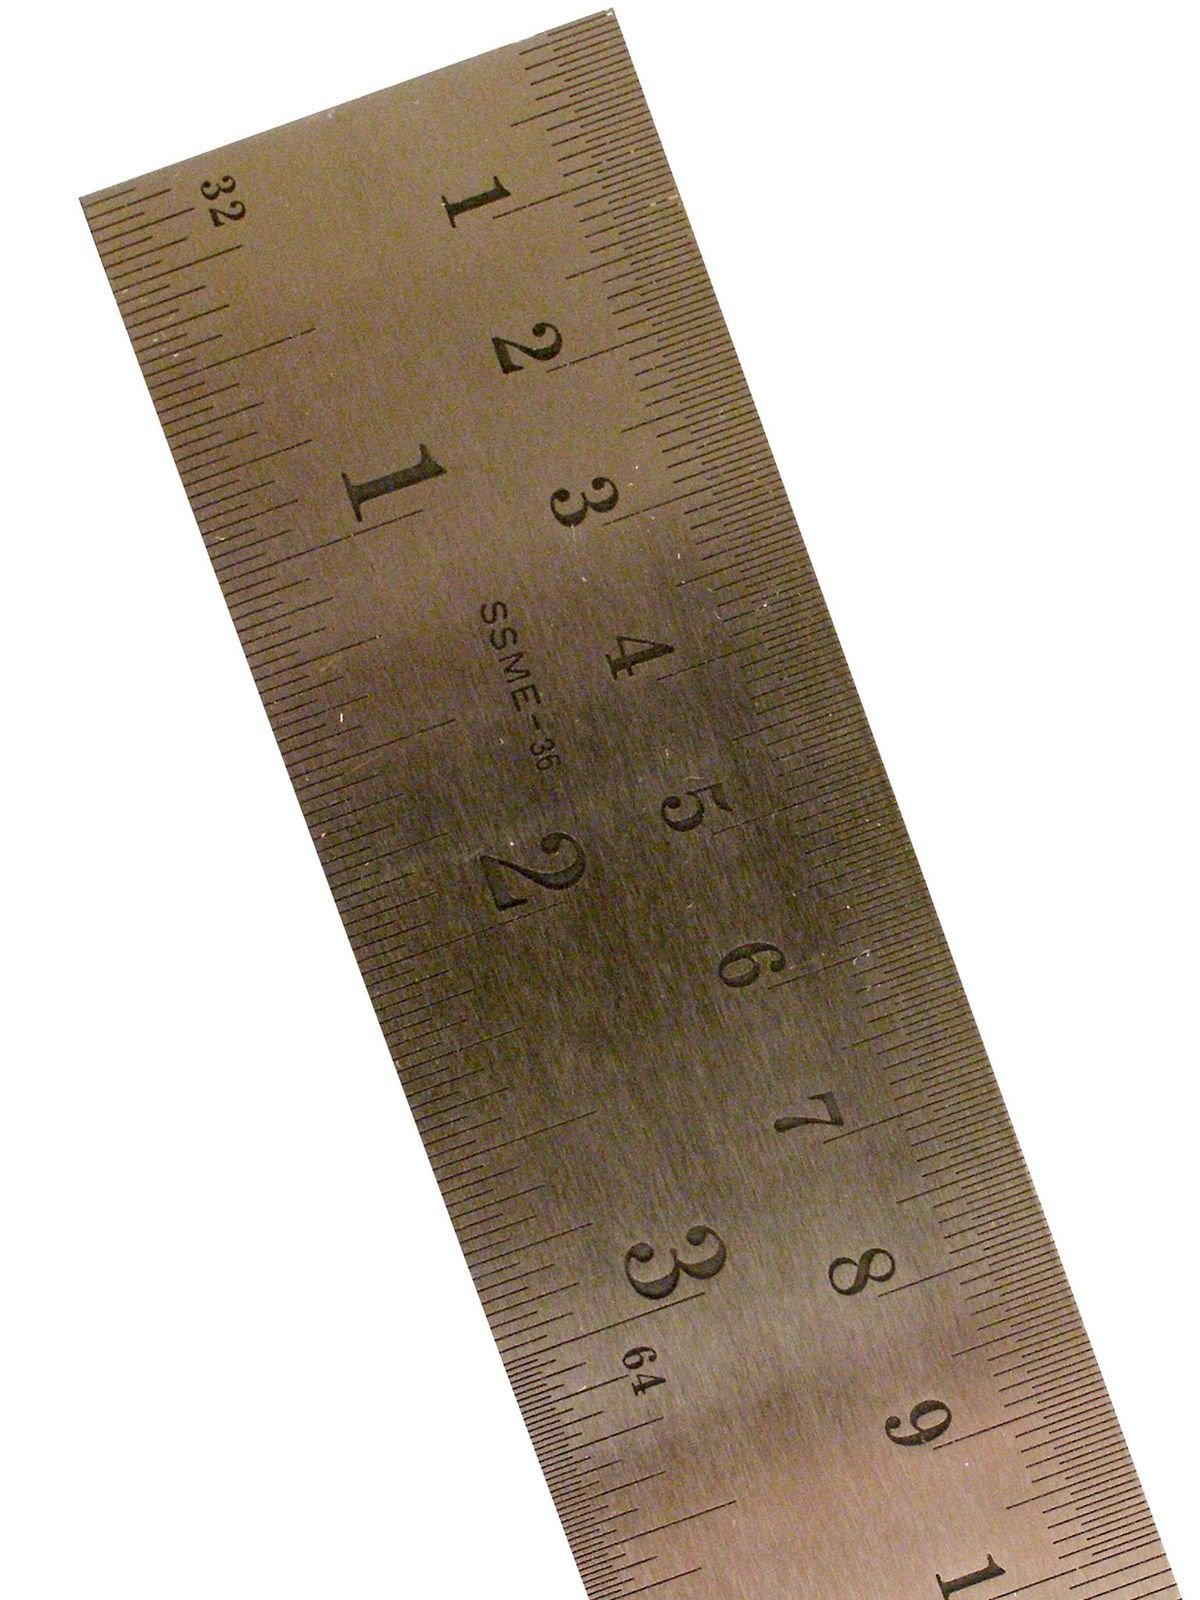 Pacific Arc - Stainless Steel Rulers Inch/Metric with Conversion Table